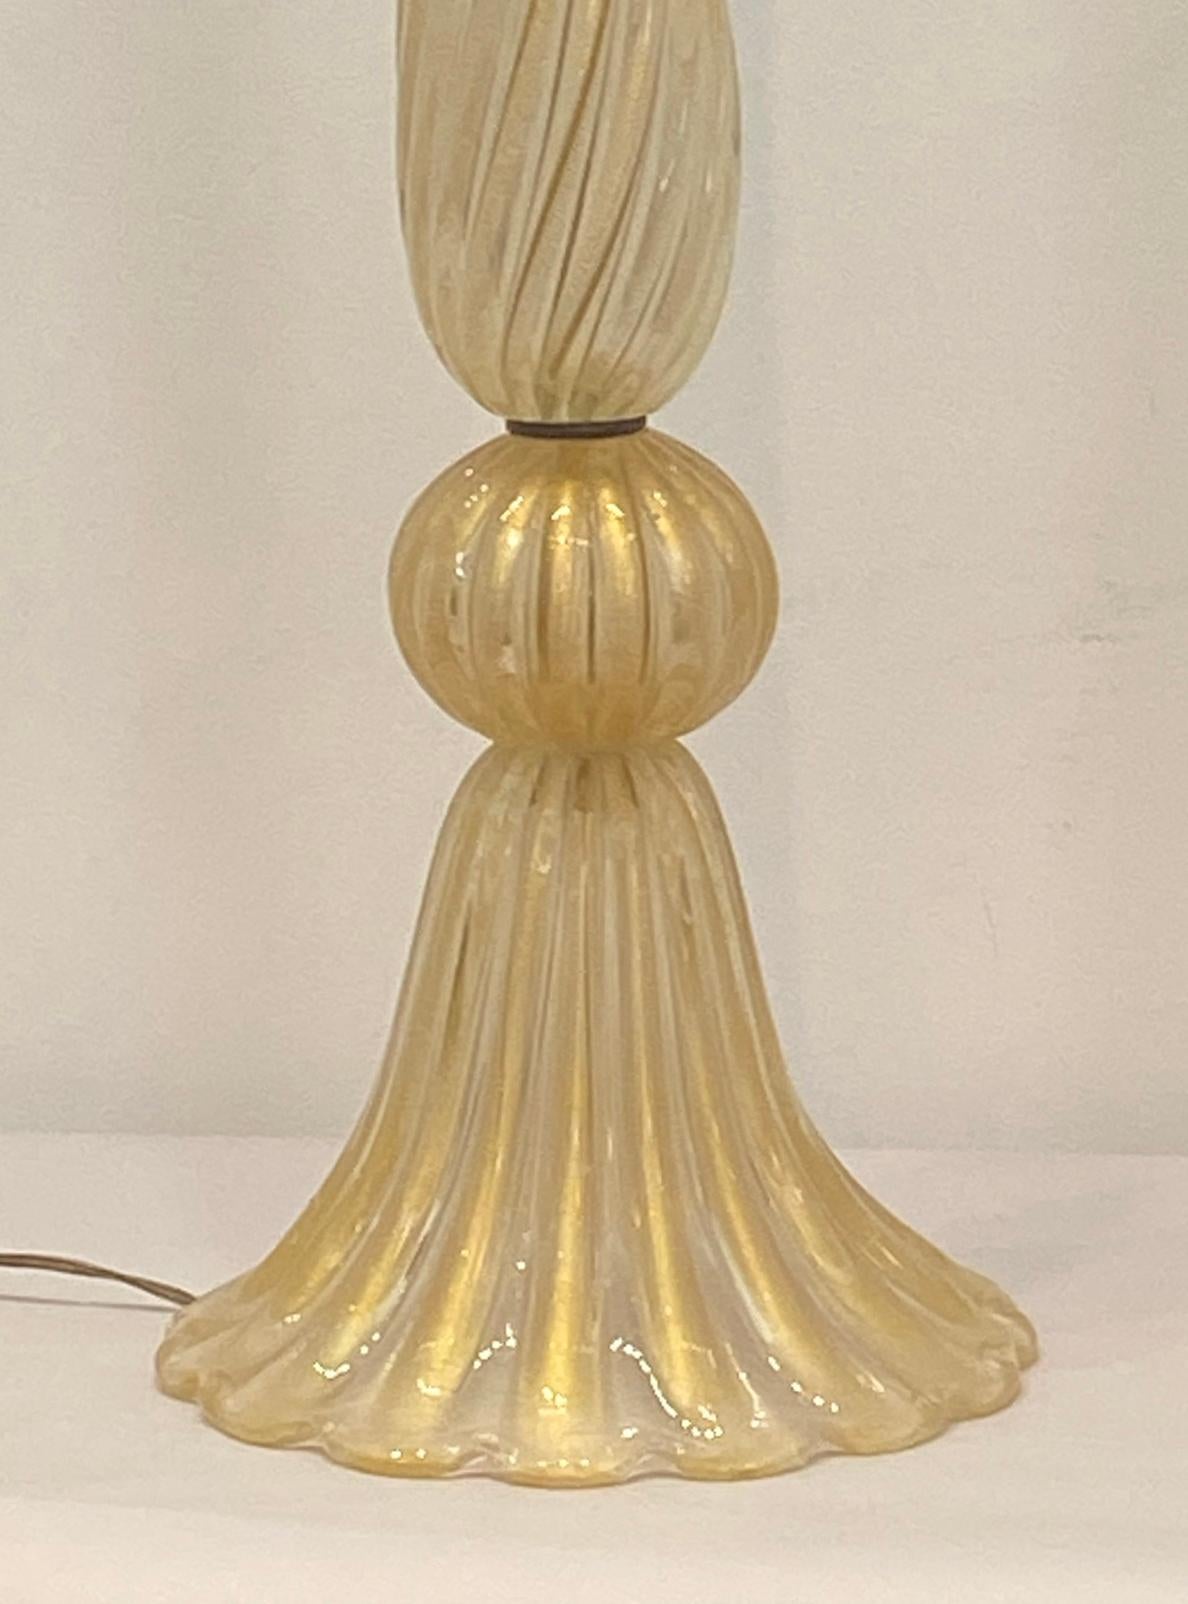 Barovier & Toso Murano Coronado d'Oro glass floor lamp. In very good condition Murano glass floor lamp. 43 inches to the socket, 11 inch diameter at the base.